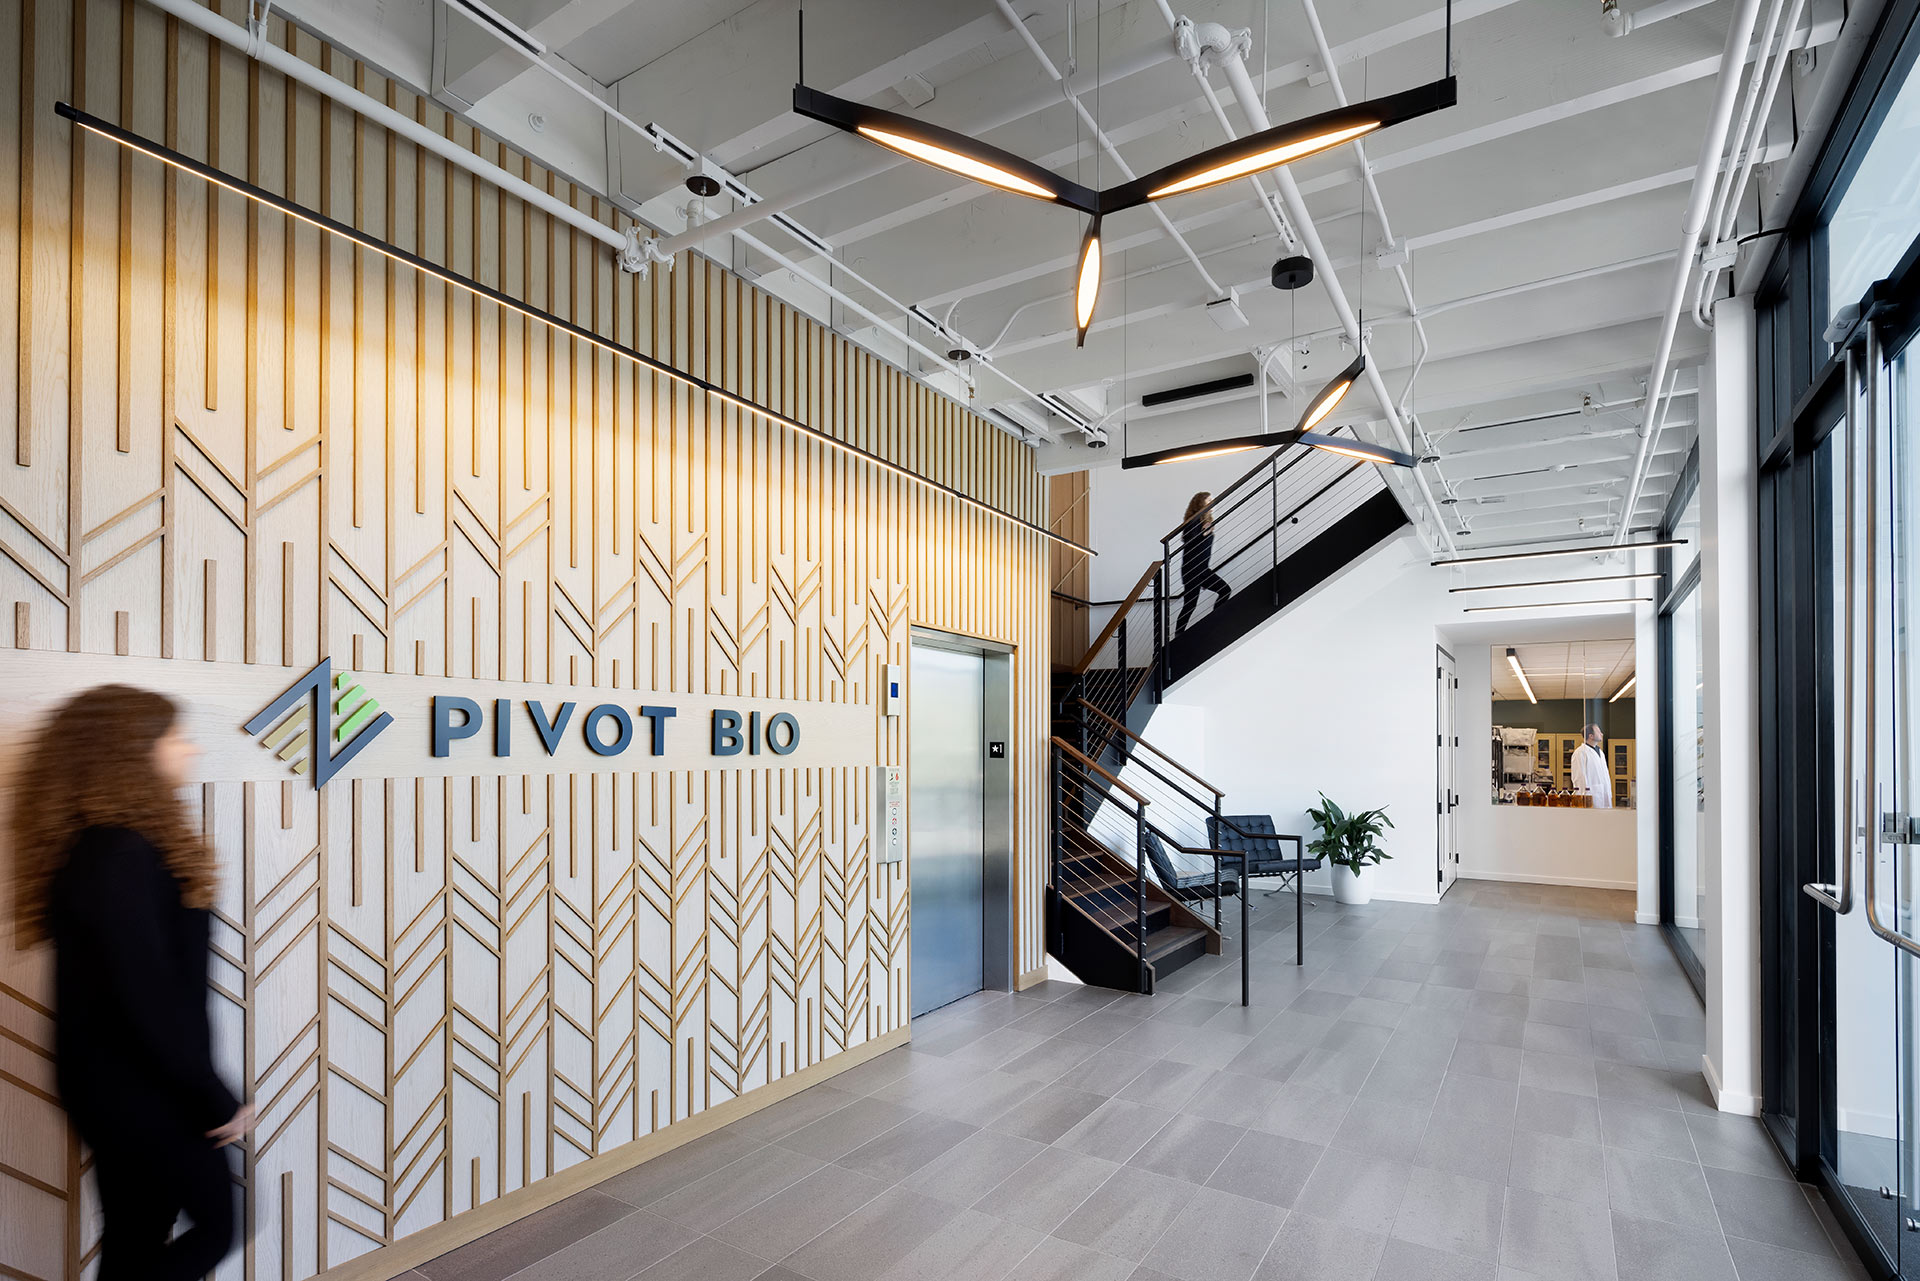 Interior at Pivot Bio life science facility, lobby with wood slat design feature, elevator, stairway, and view into lab